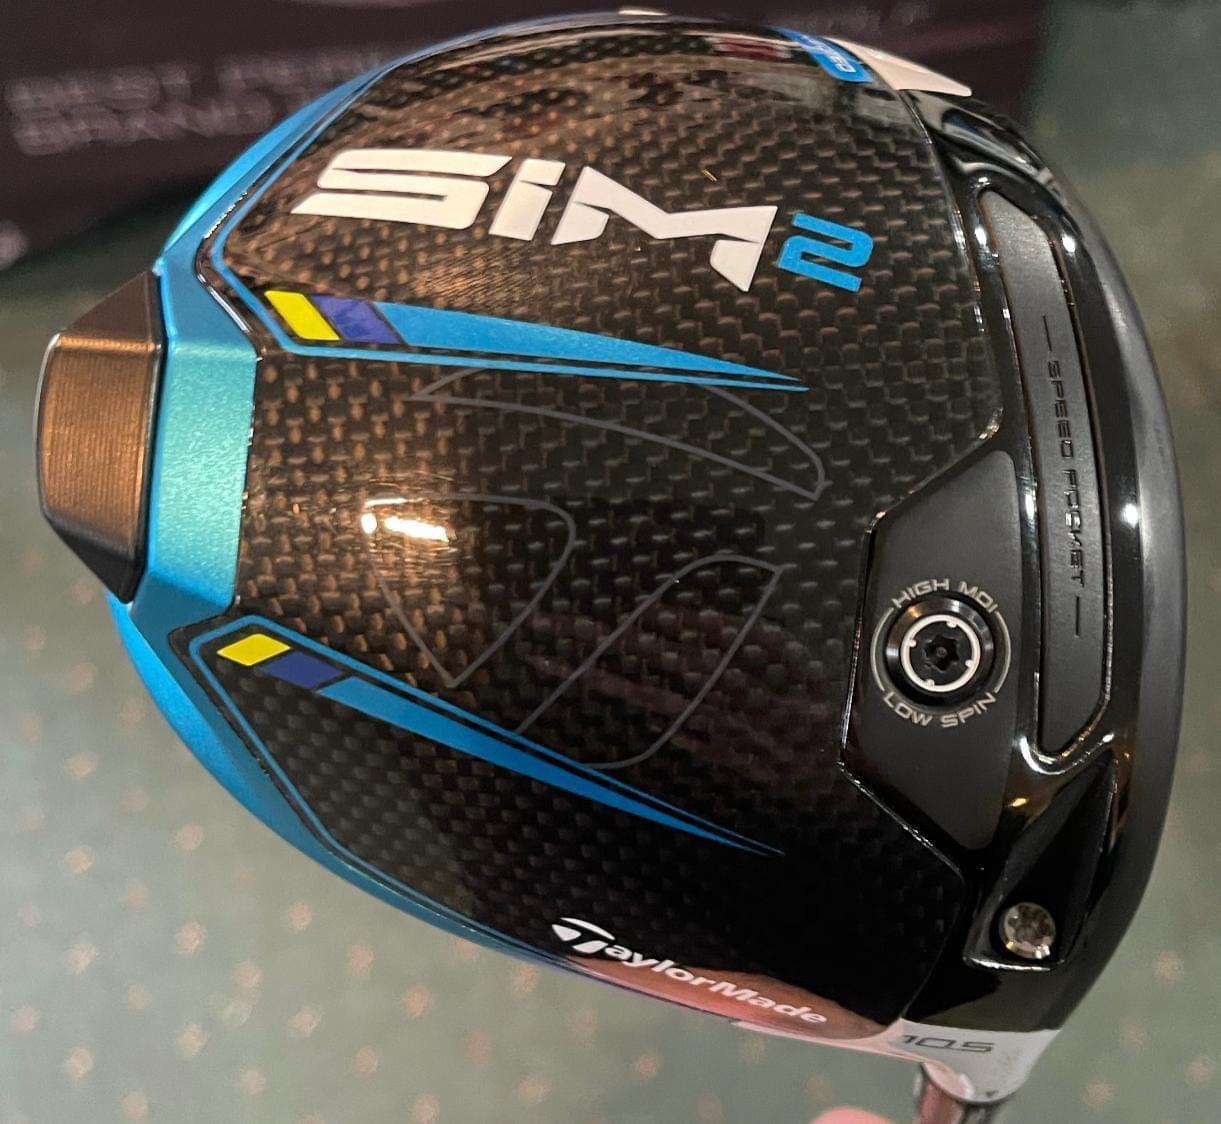 TaylorMade SIM 2 Driver 2021 か！？発表日は？？ | 電車で酔いどれ 